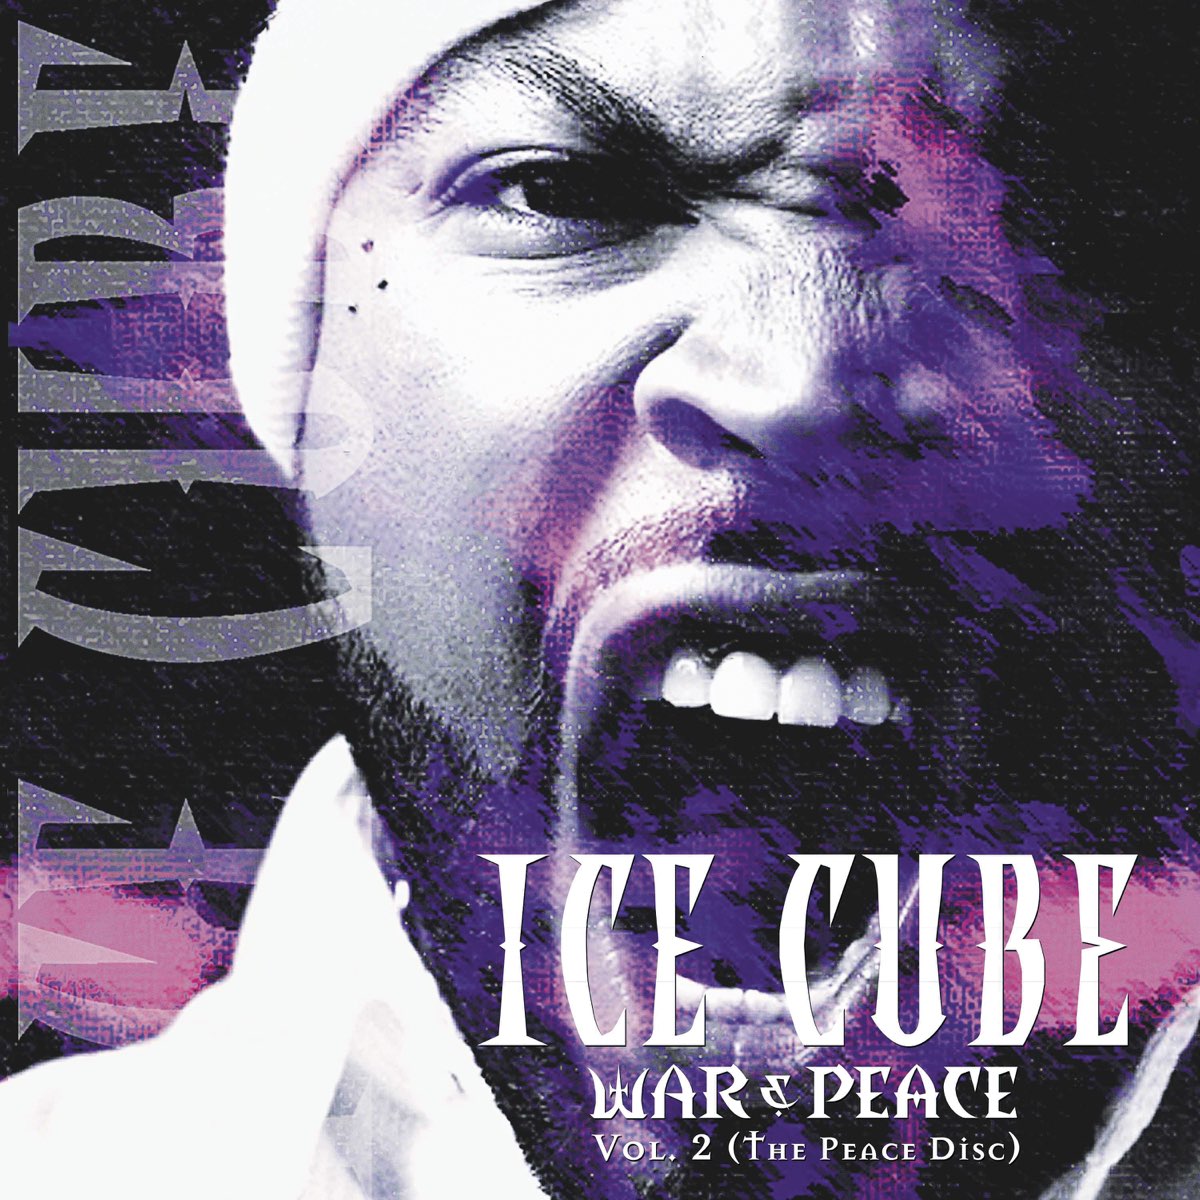 ‎war And Peace Vol 2 The Peace Disc By Ice Cube On Apple Music